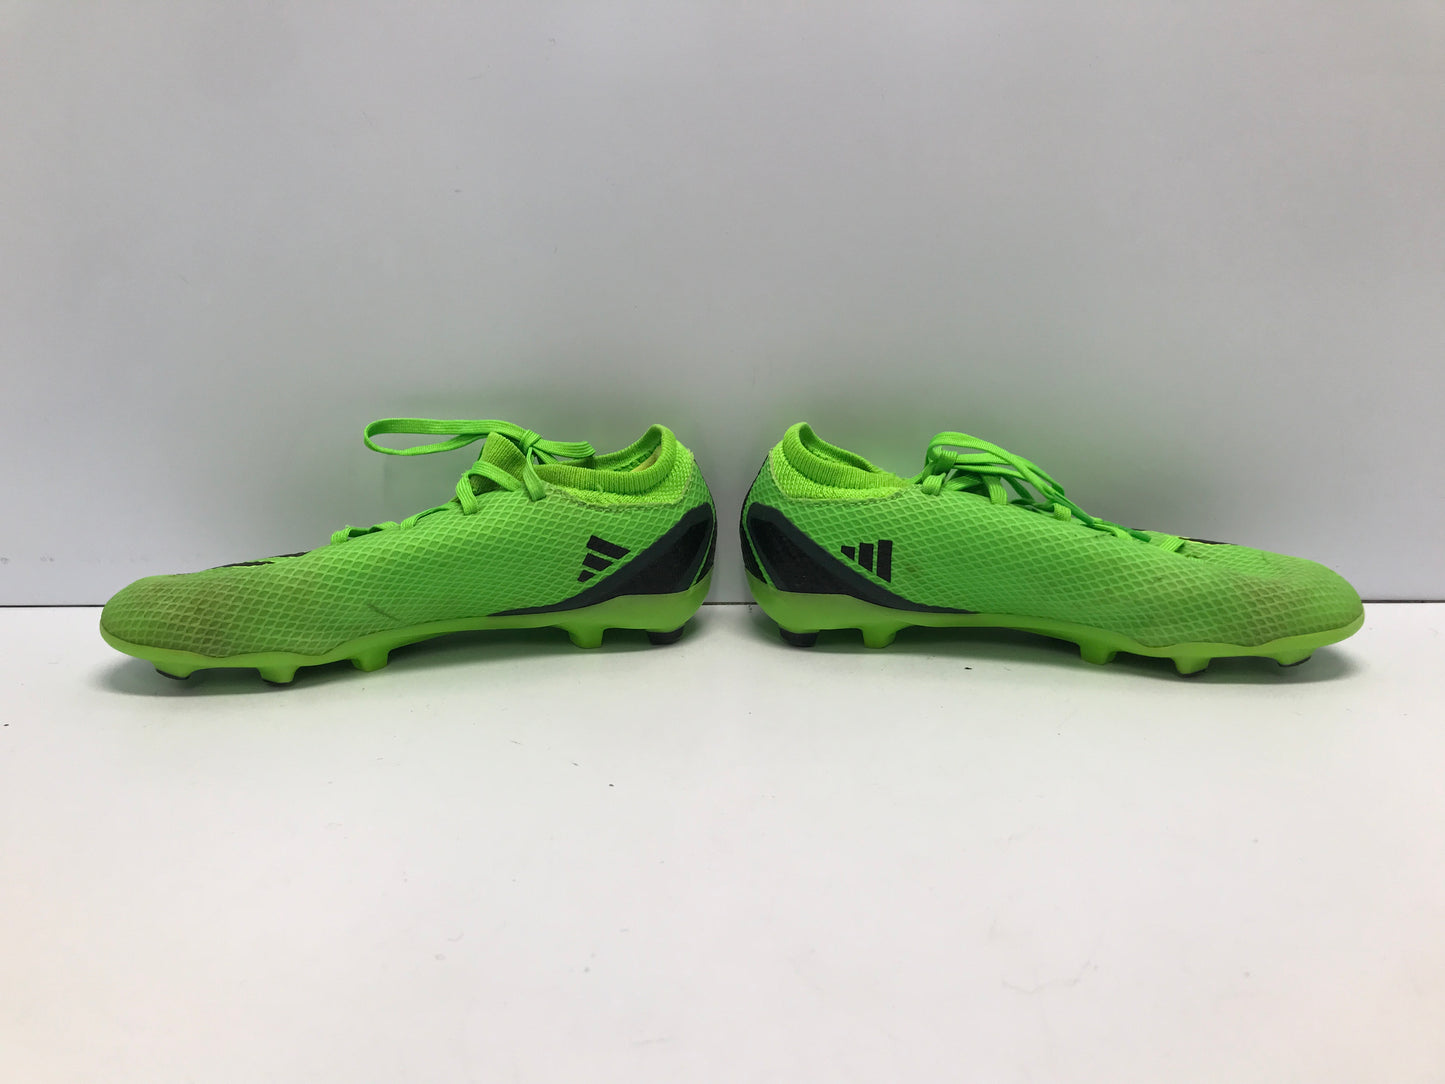 Soccer Shoes Cleats Child Size 3.5 Lime Black Slipper Foot Minor Marks